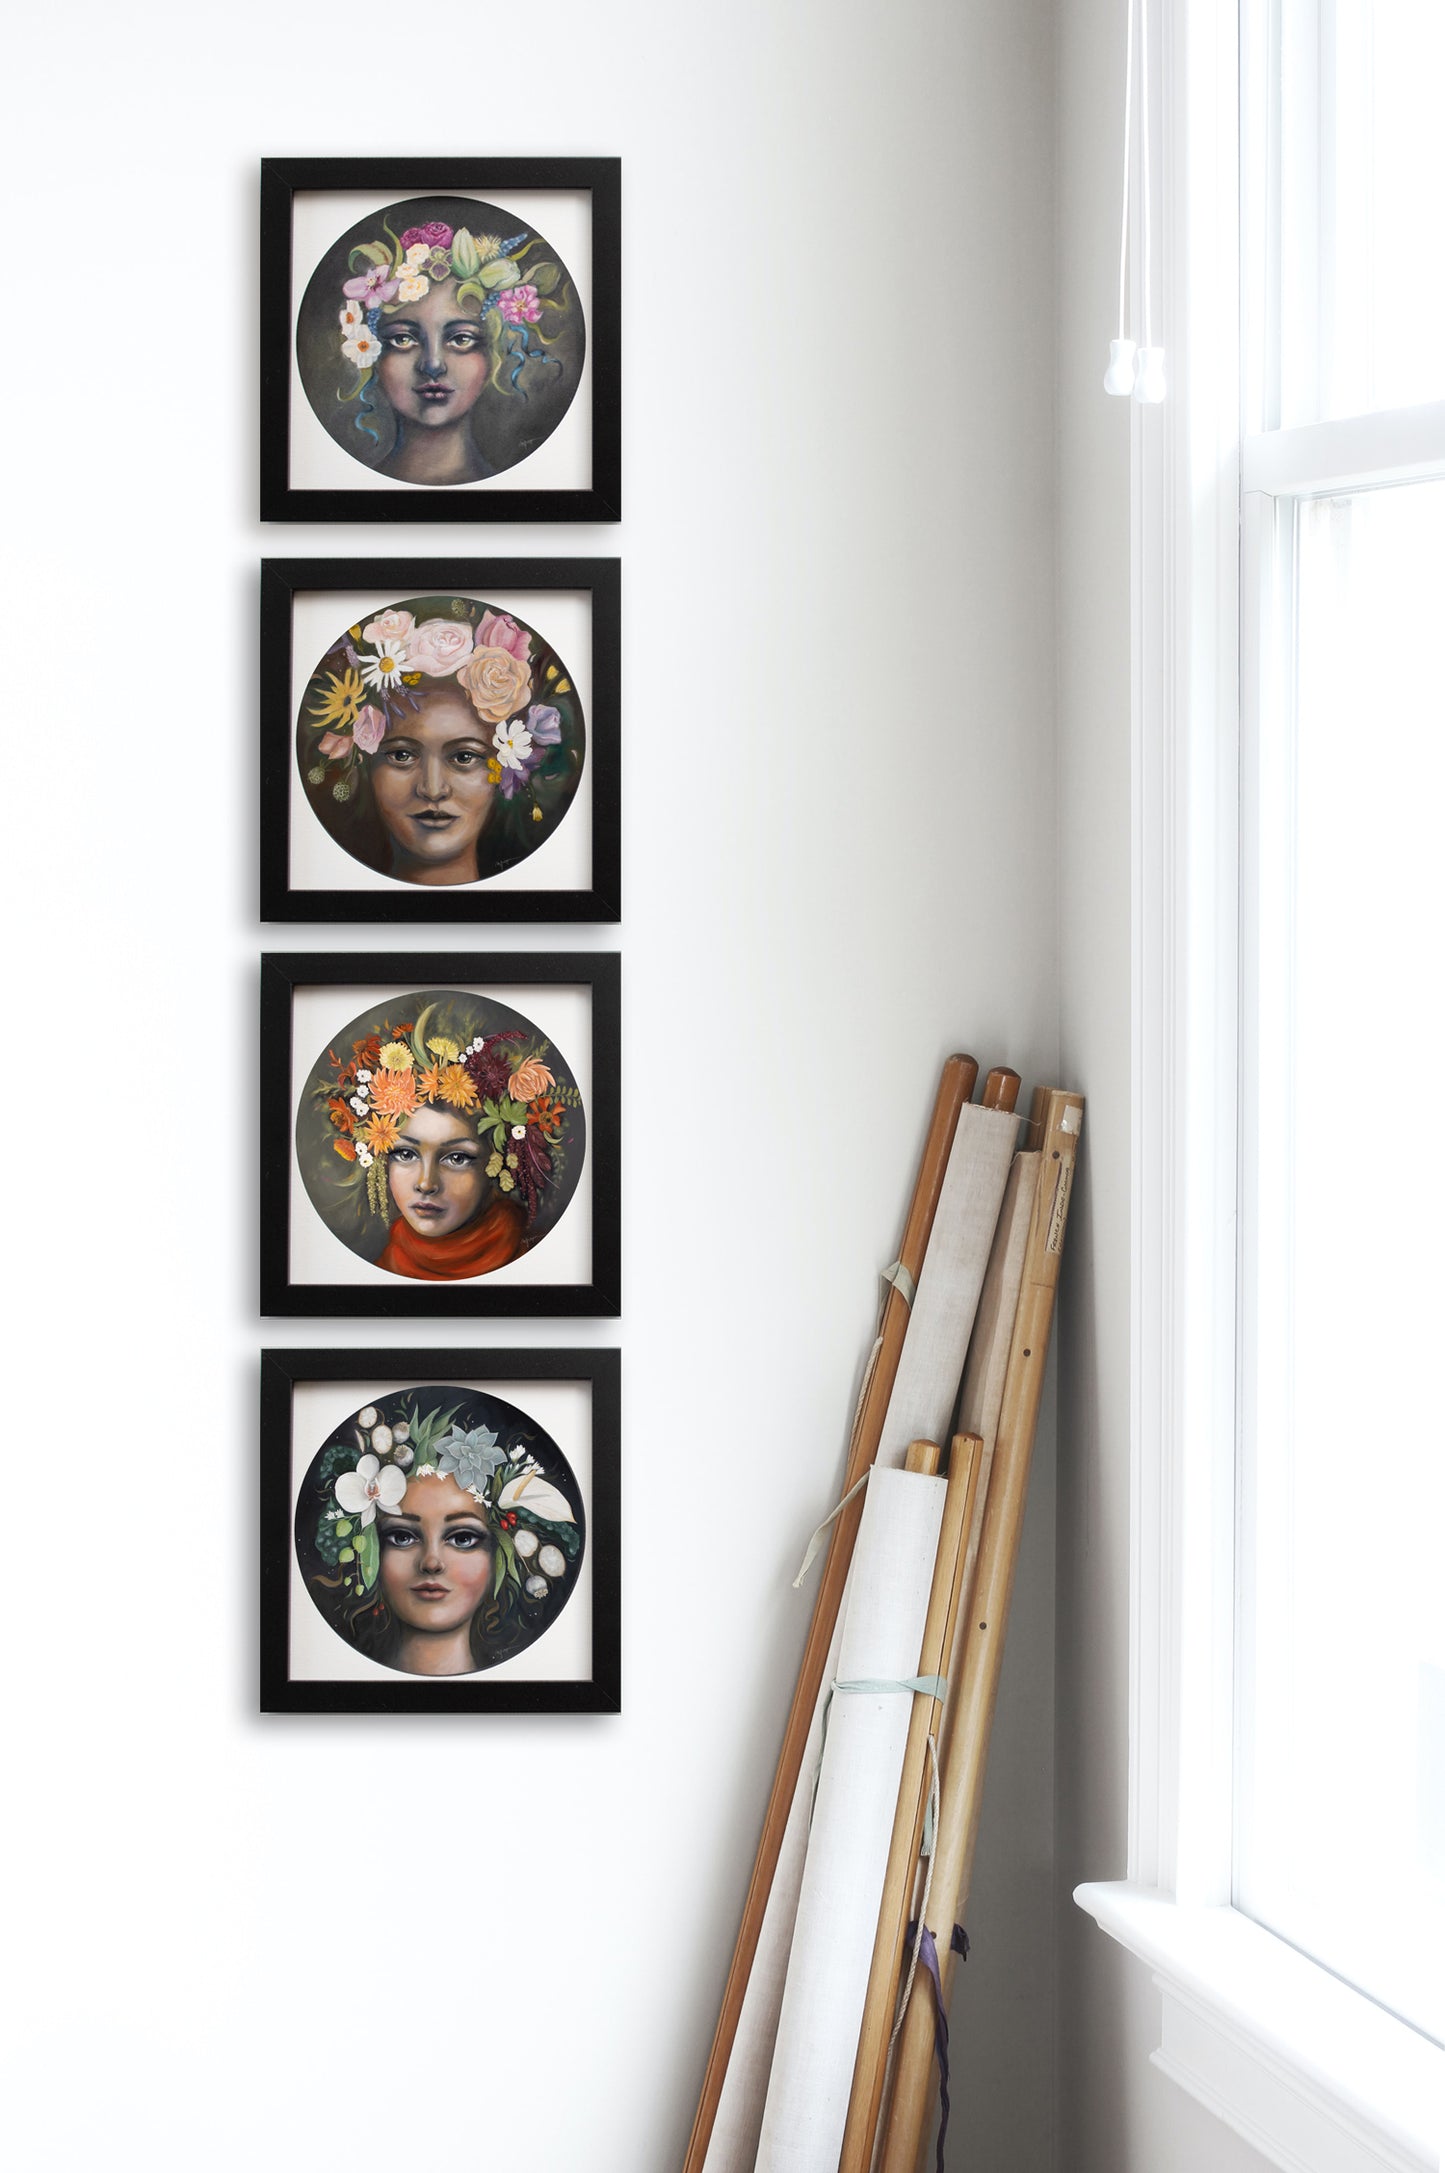 Instant gallery wall with set of 4 seasonal portrait prints. Each print features the flowers of Spring, Summer, Autumn/fall or Winter in their hair. Shown here framed in black on a white wall beside a bright window.